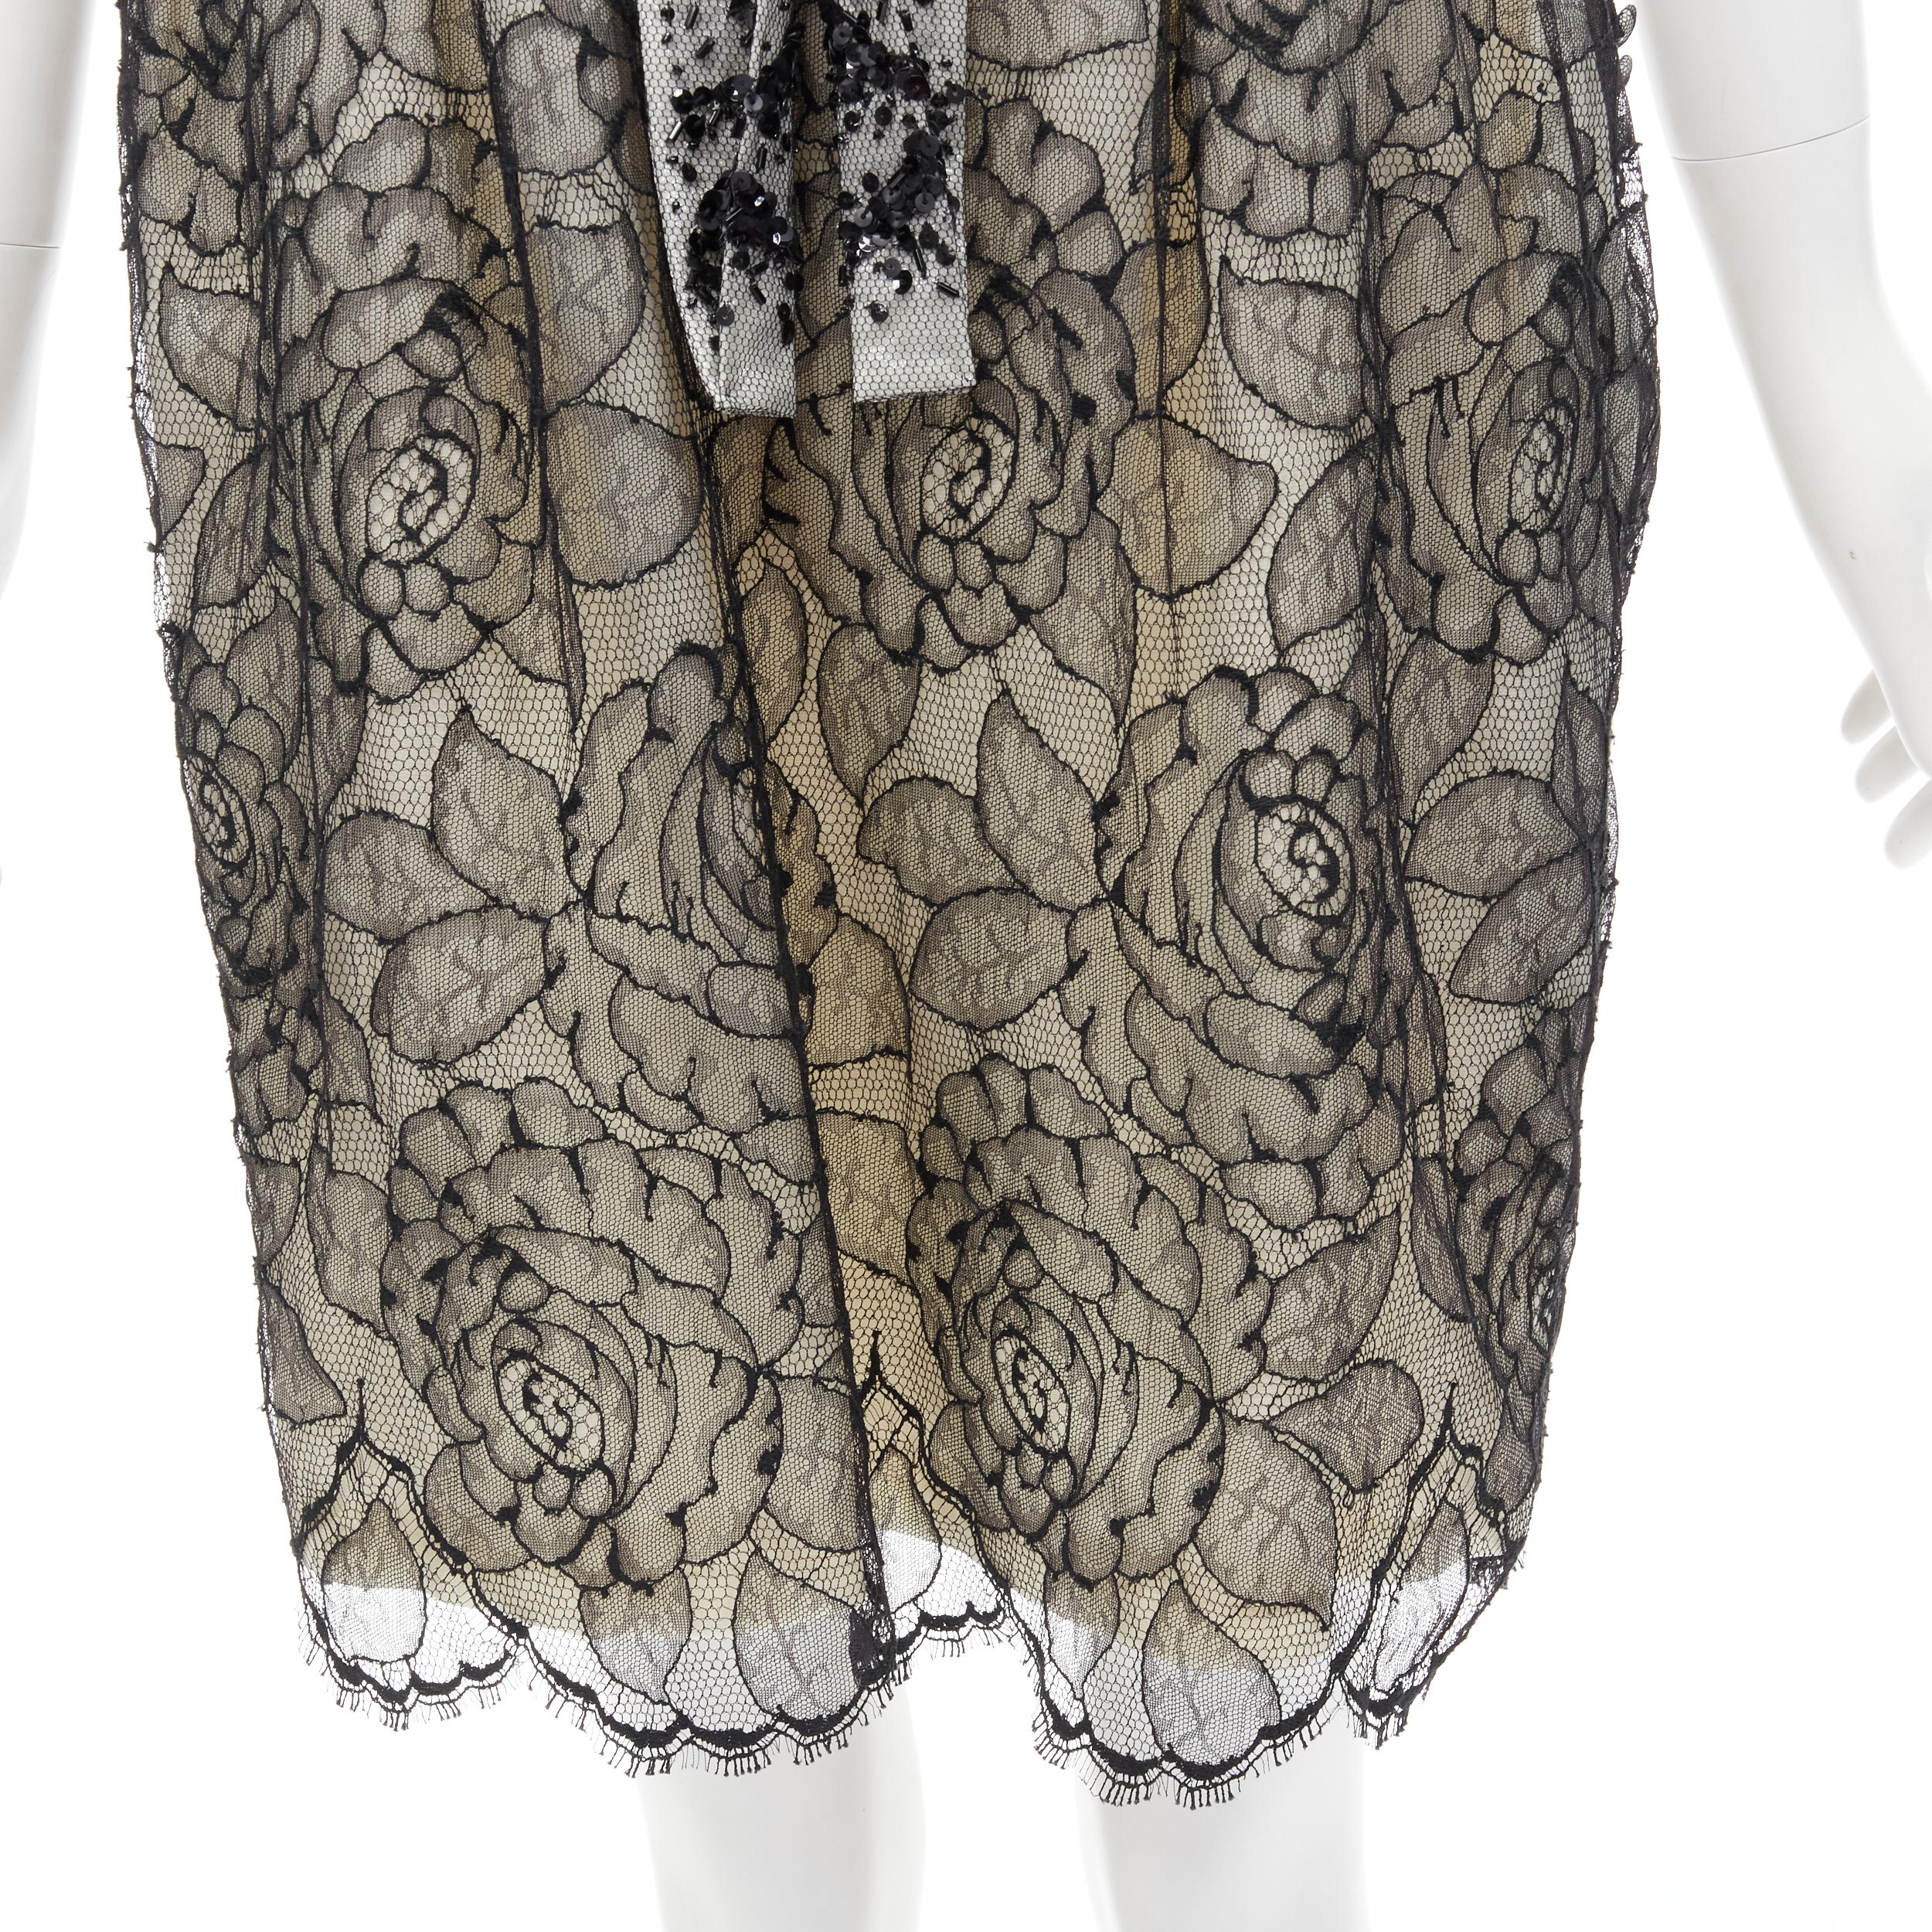 CHRISTIAN DIOR JOHN GALLIANO 2011 Runway lace bead embellished bow dress FR36 S For Sale 3